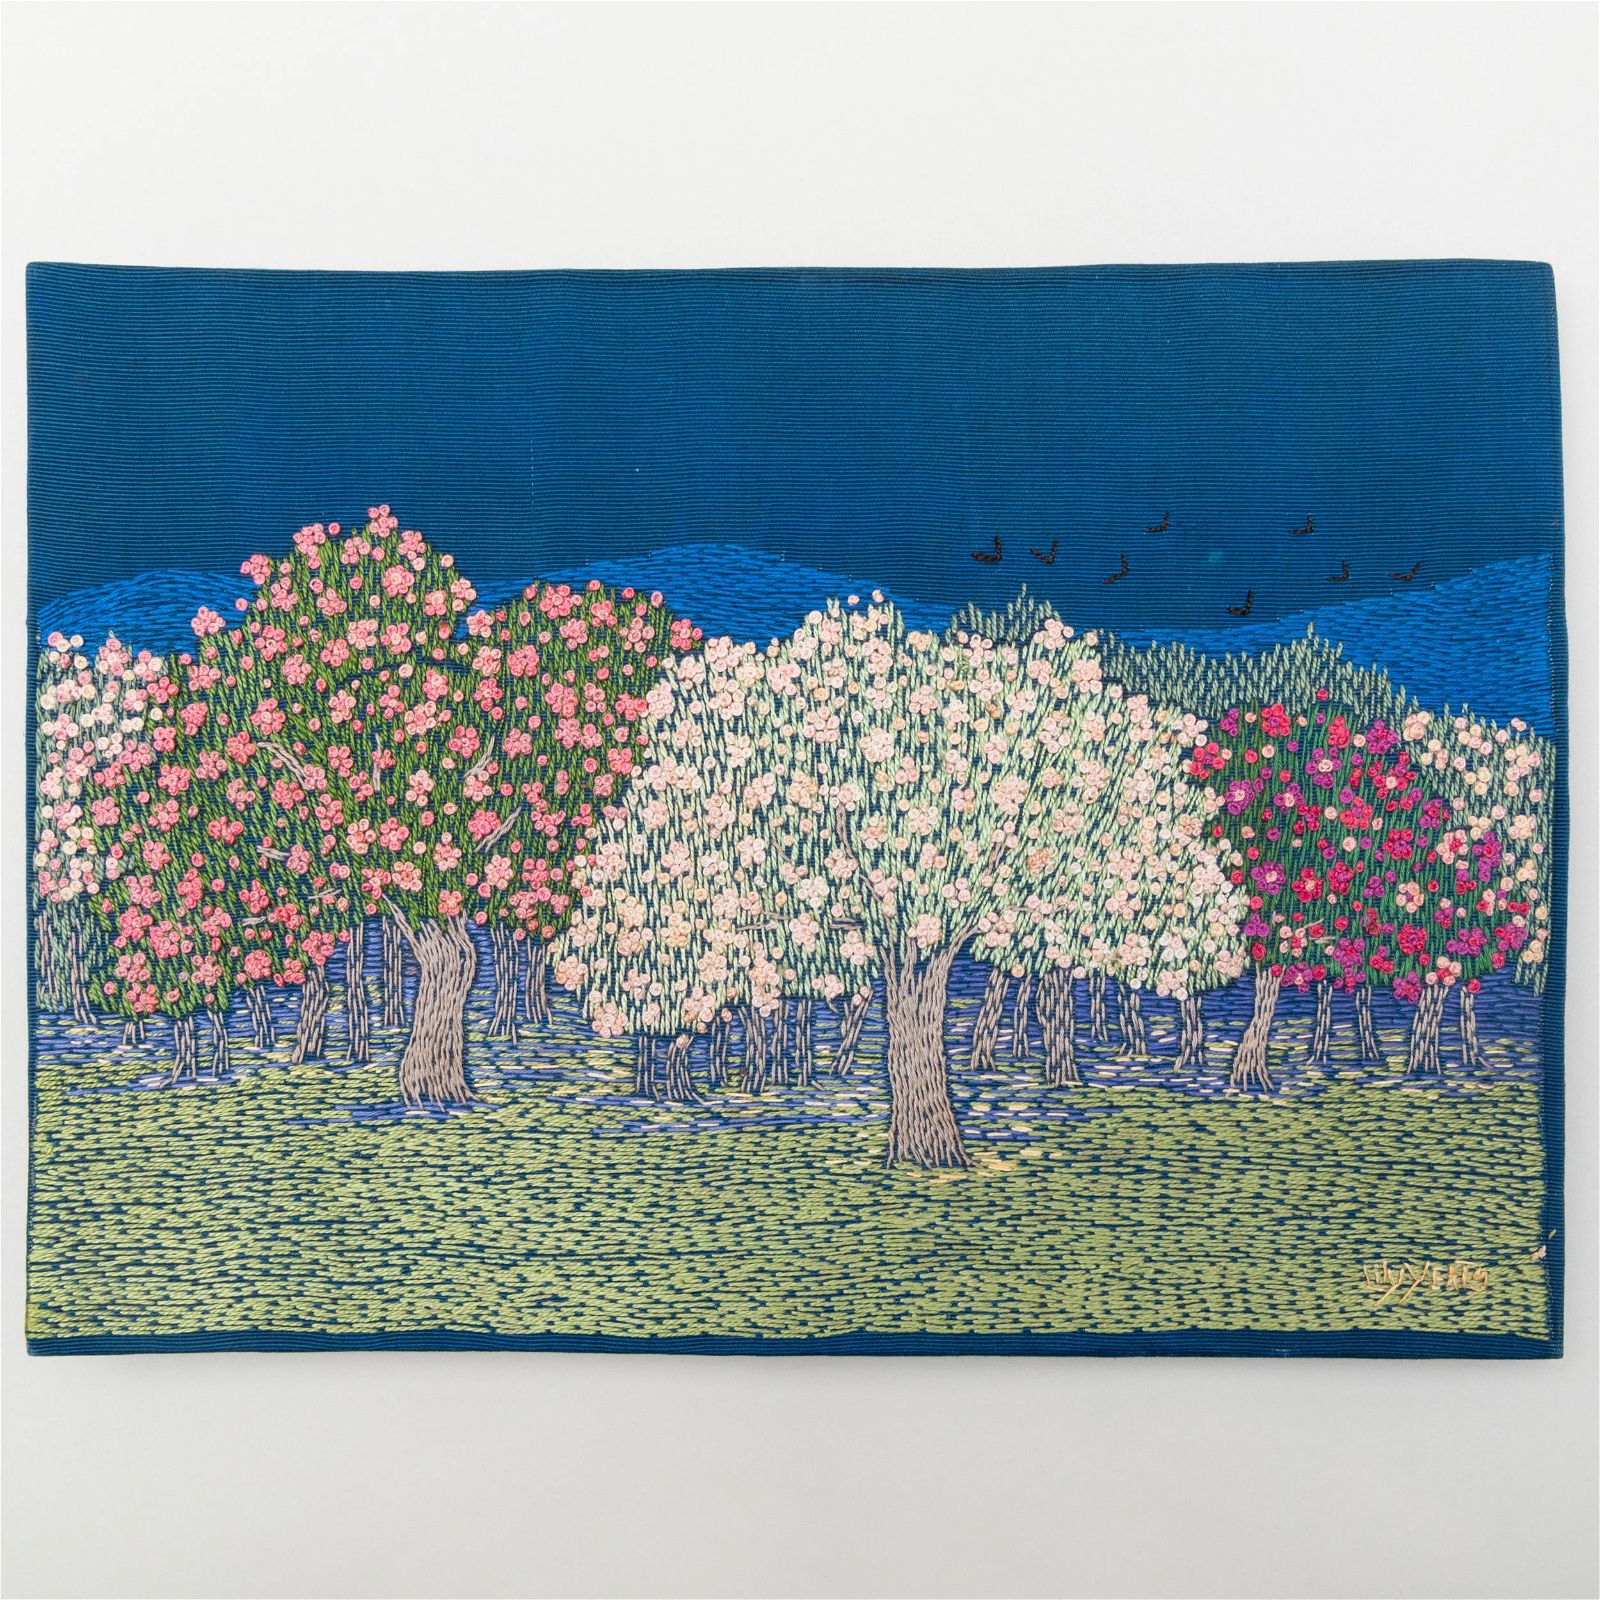 Circa-1900 Lily Yeats embroidered panel, which sold for $7,680 at Stair Galleries.